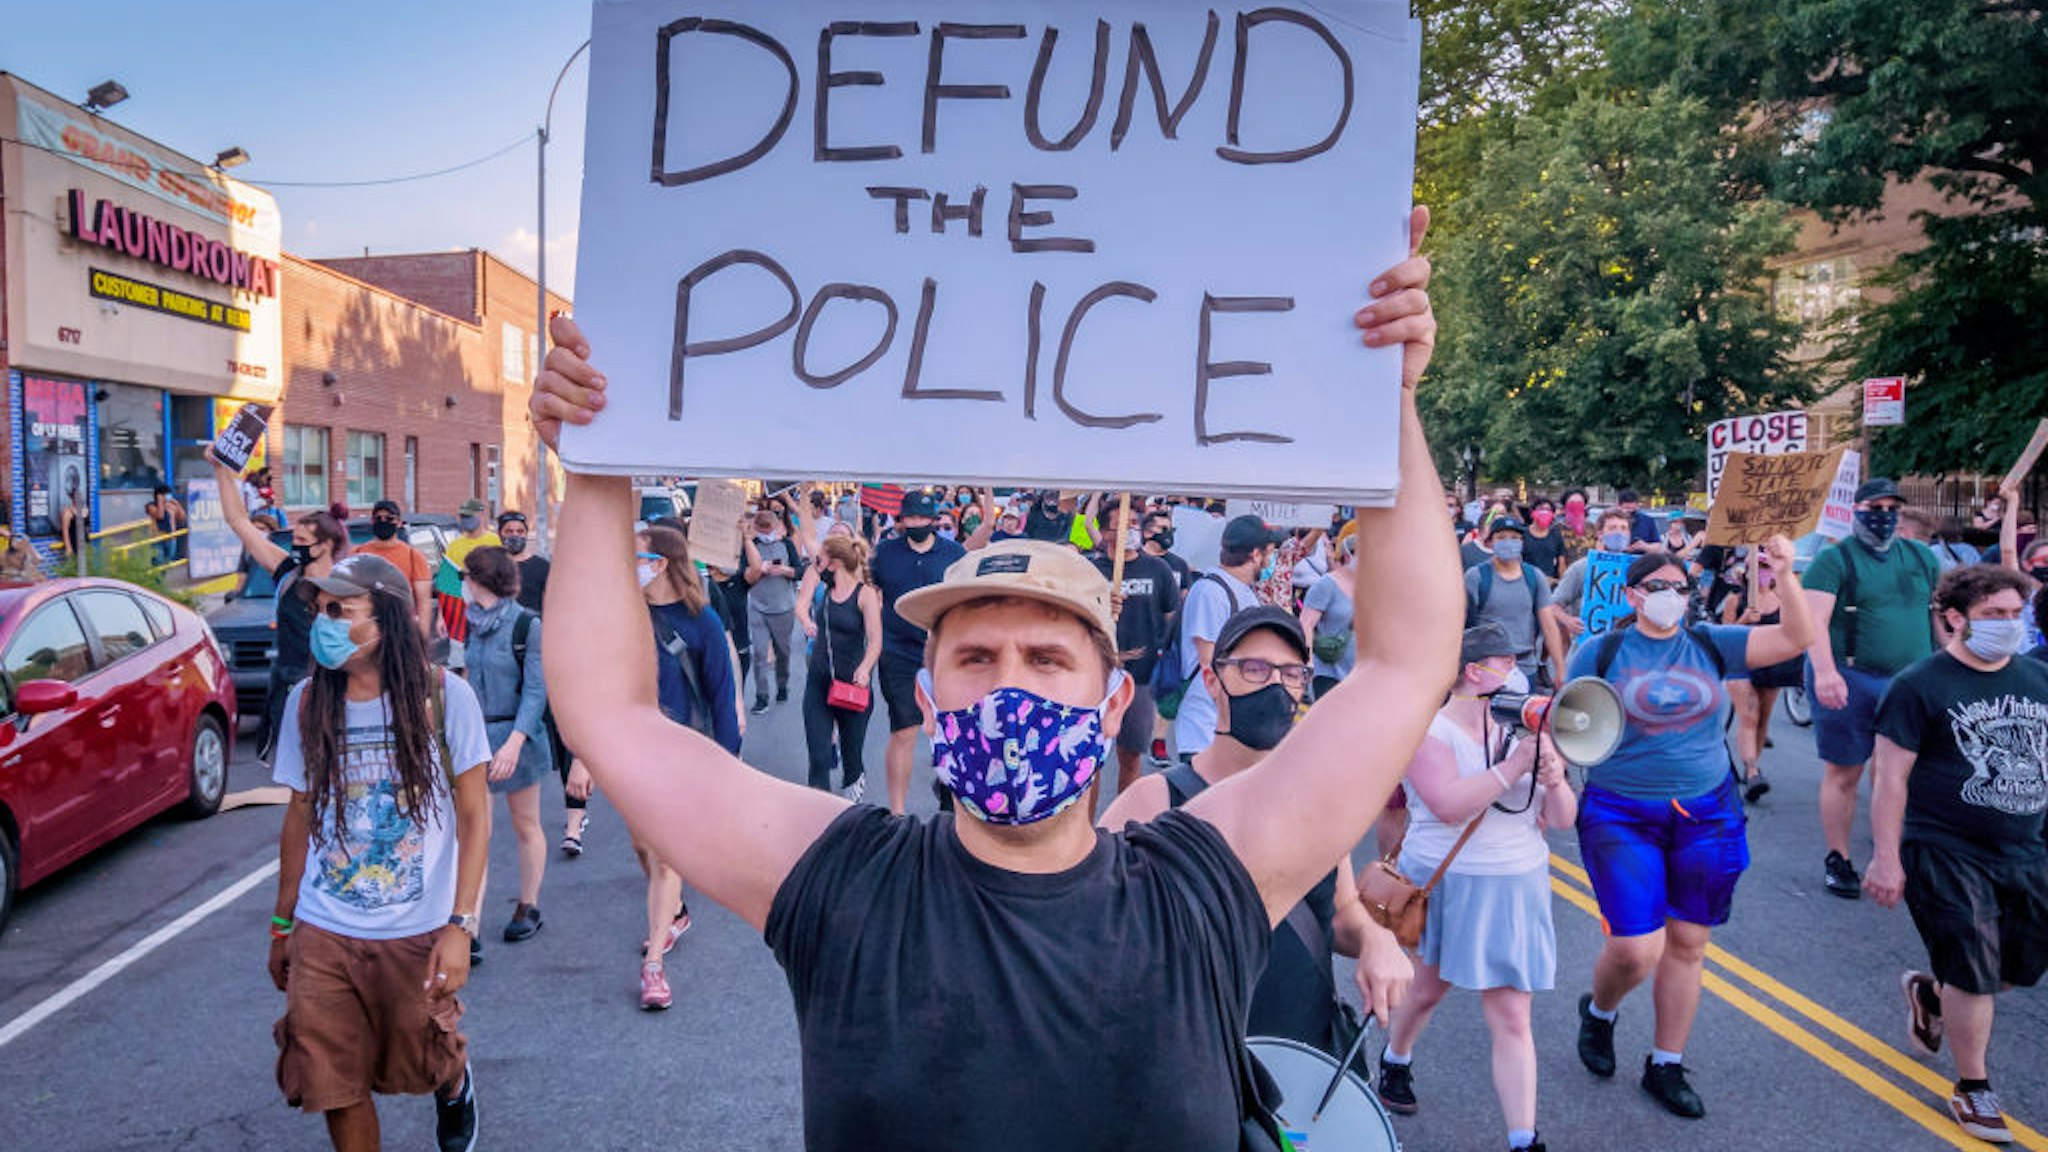 BROOKLYN, NEW YORK, UNITED STATES - 2020/07/12: A counterprotester holding a Defund Police sign at the protest. Pro-NYPD marchers clashed with a big crowd of Black Lives Matter counterprotesters during the Ã¬Back the BlueÃ® rally and march in Bay Ridge, Brooklyn.